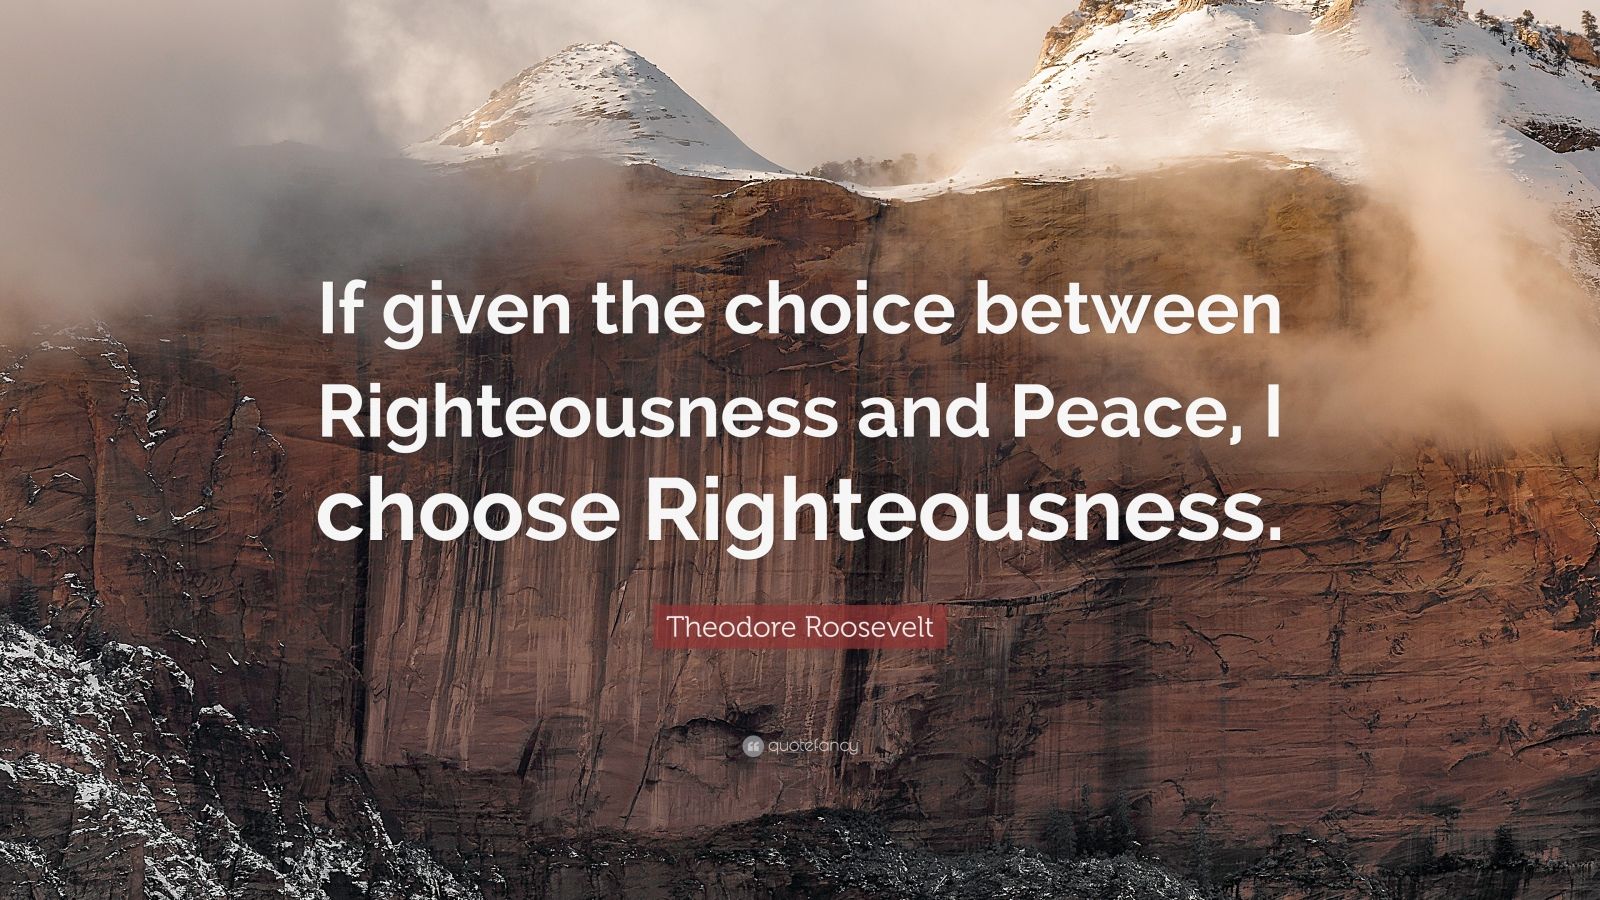 If given the choice between Righteousness